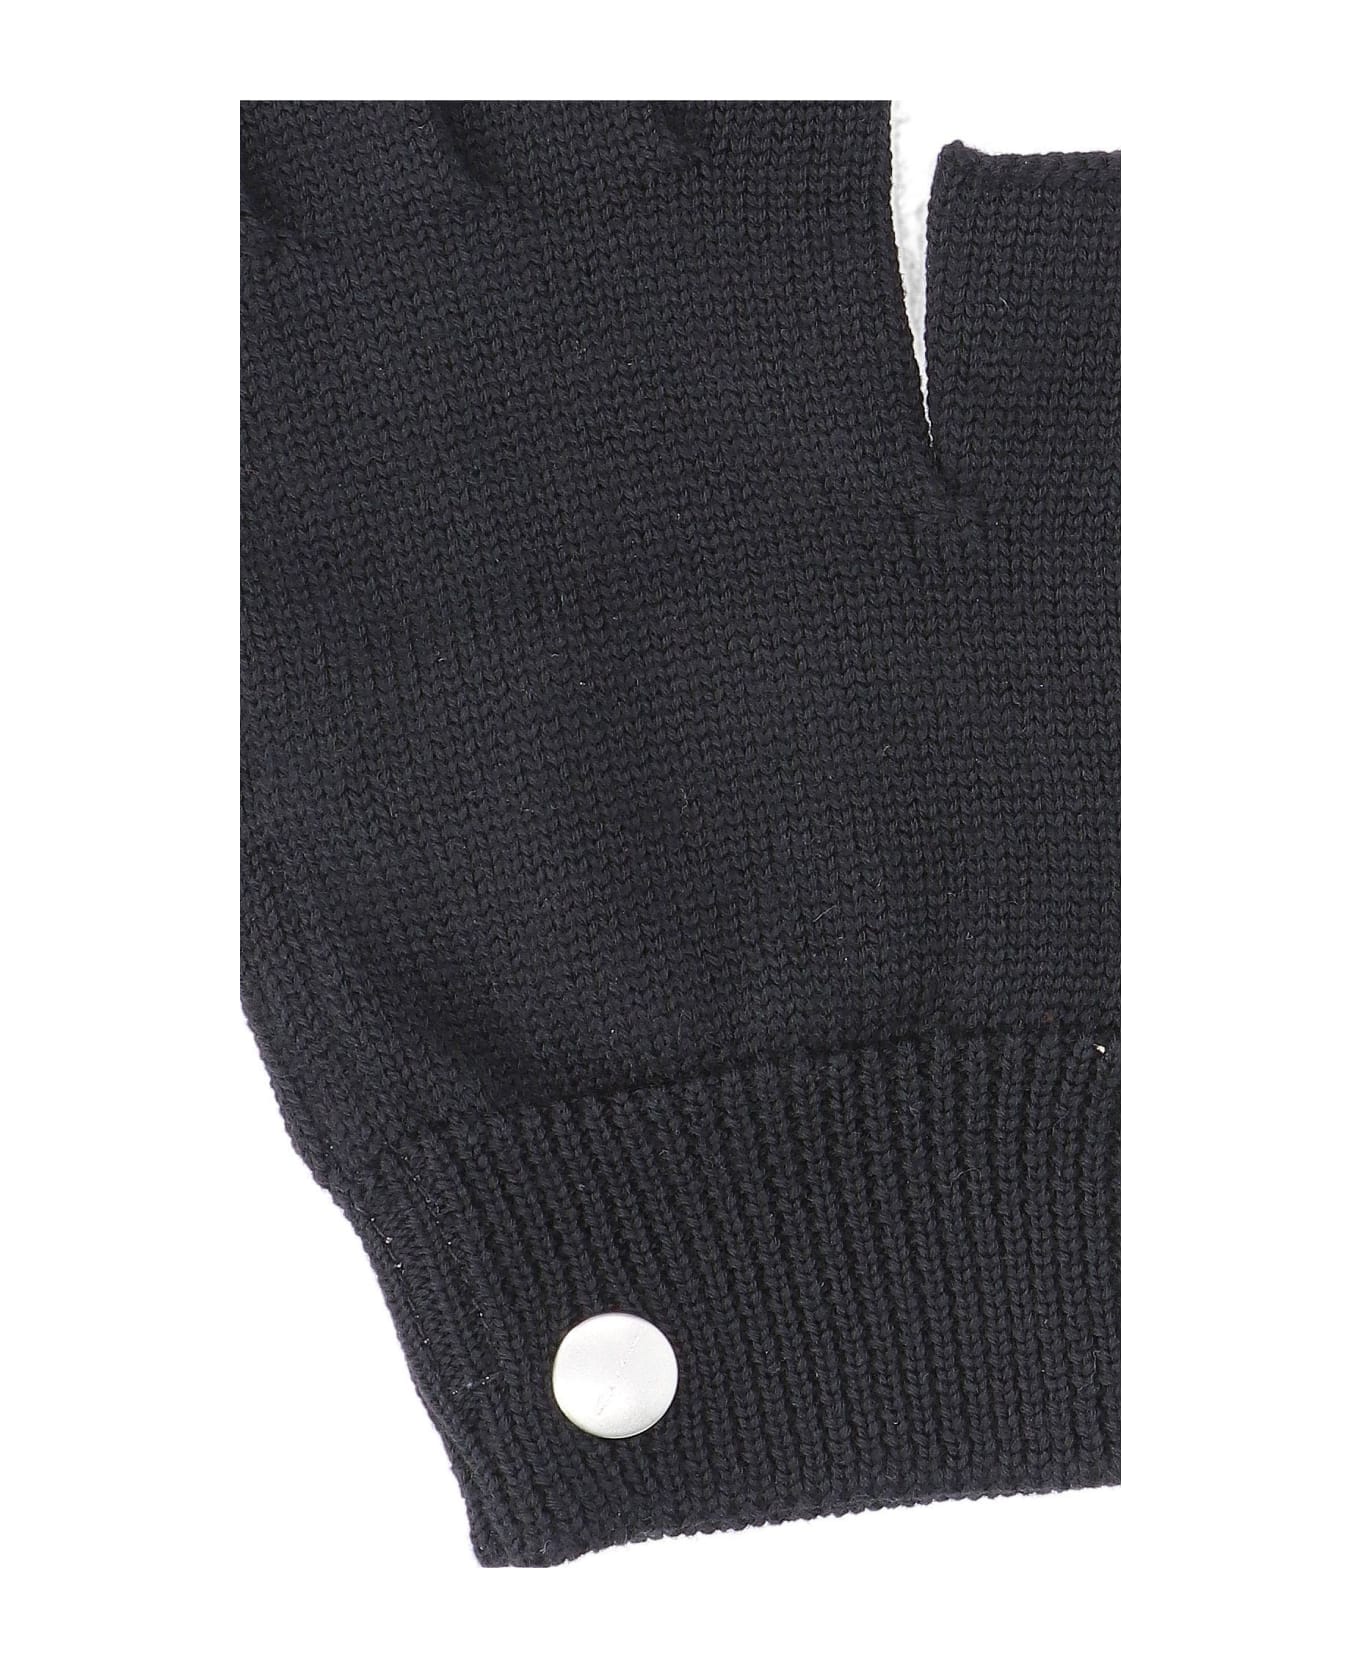 Rick Owens Knitted Gloves - Black